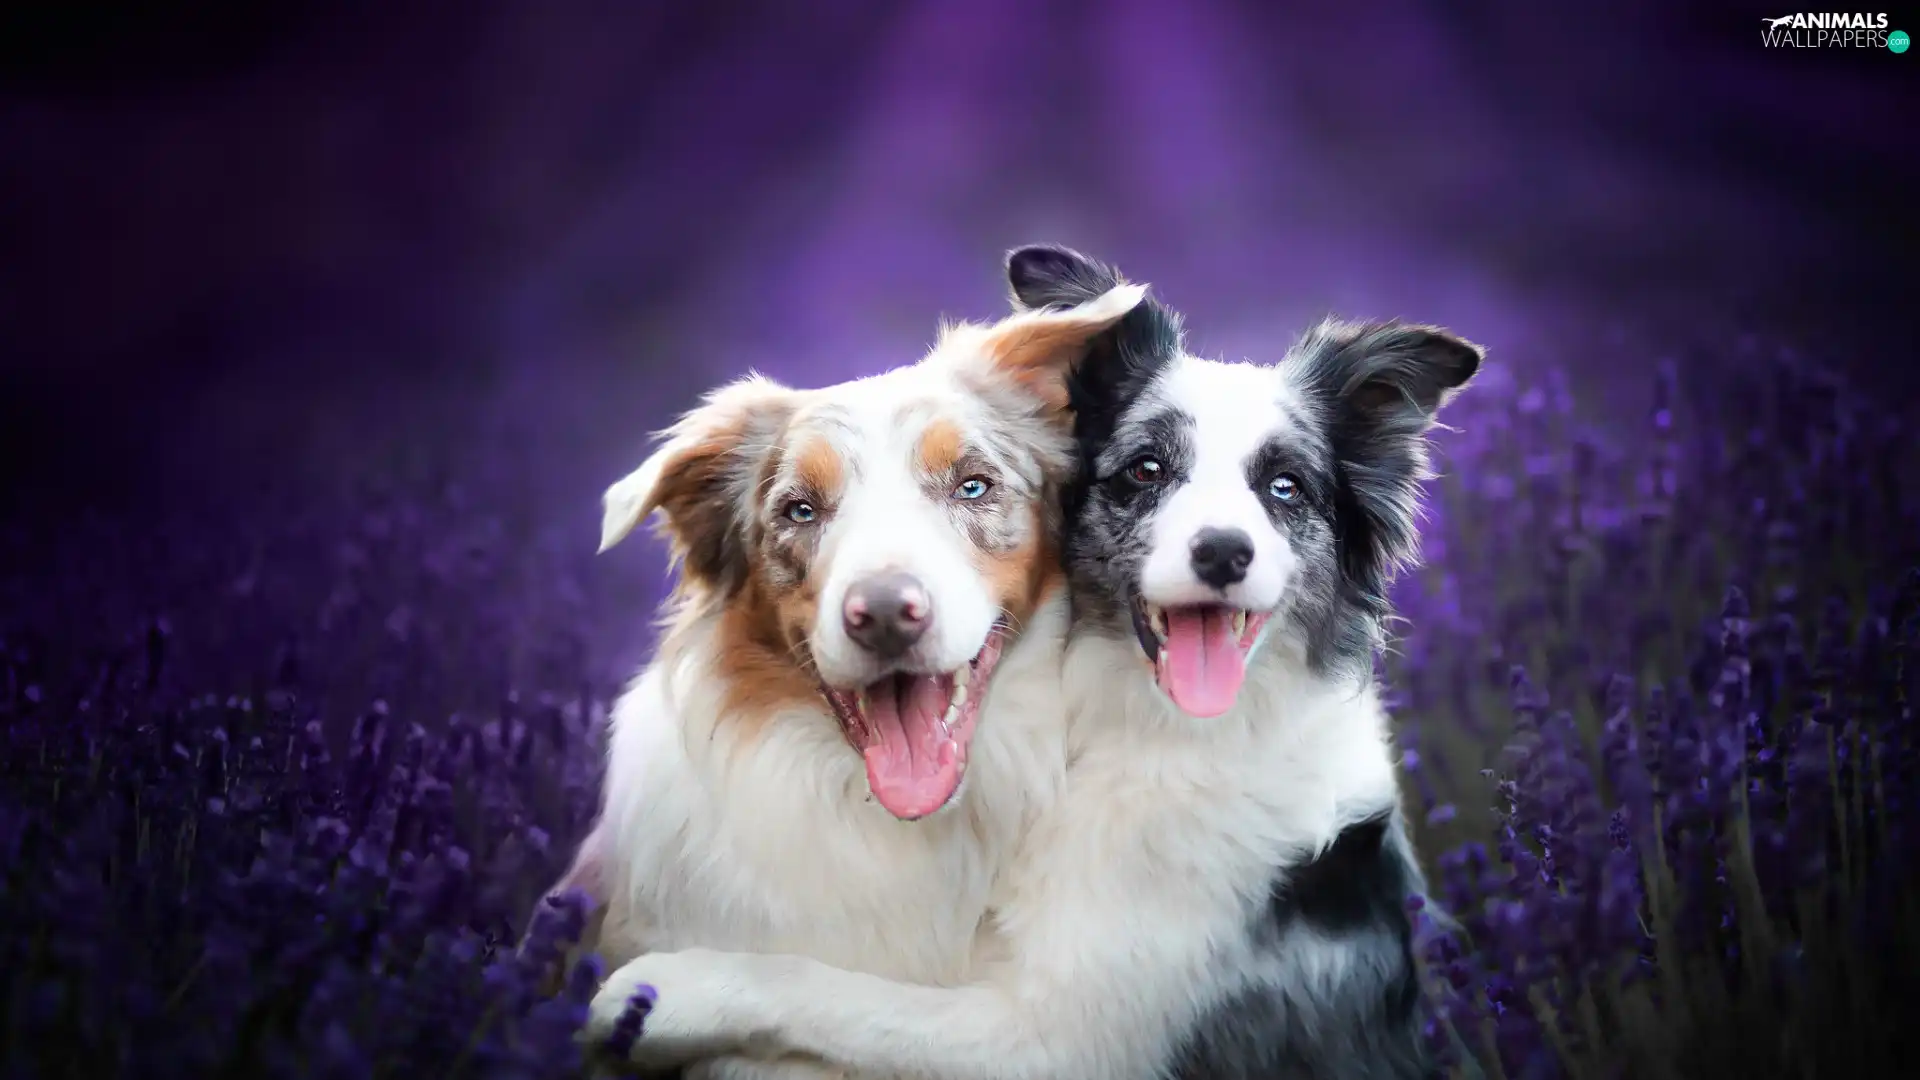 Border Collie, lavender, Dogs, Two cars, smiling